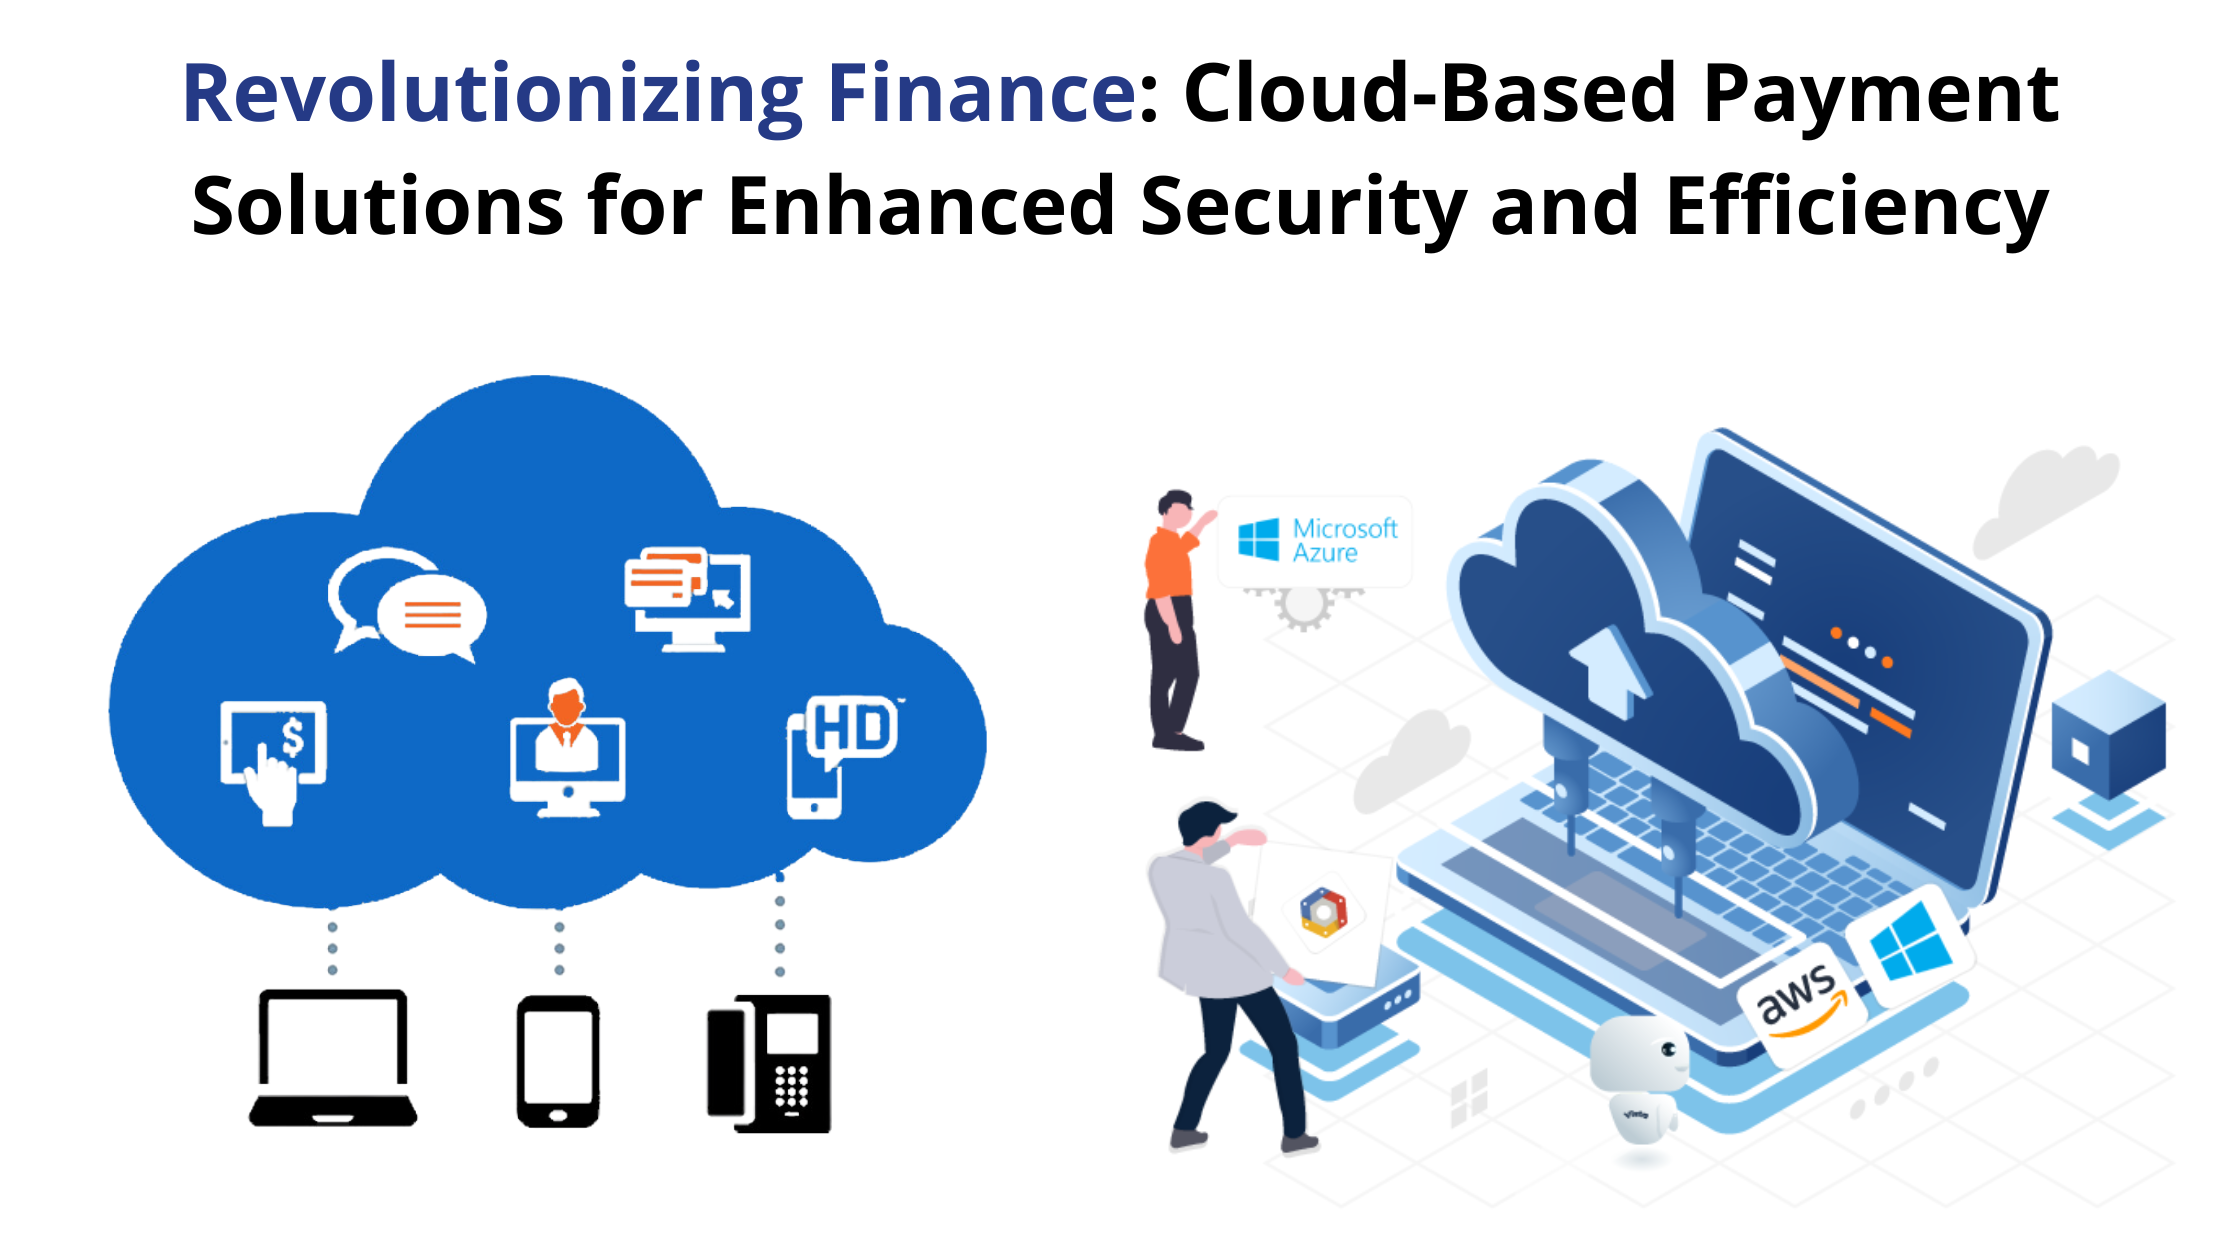 Revolutionizing Finance: Cloud-Based Payment Solutions for Enhanced Security and Efficiency